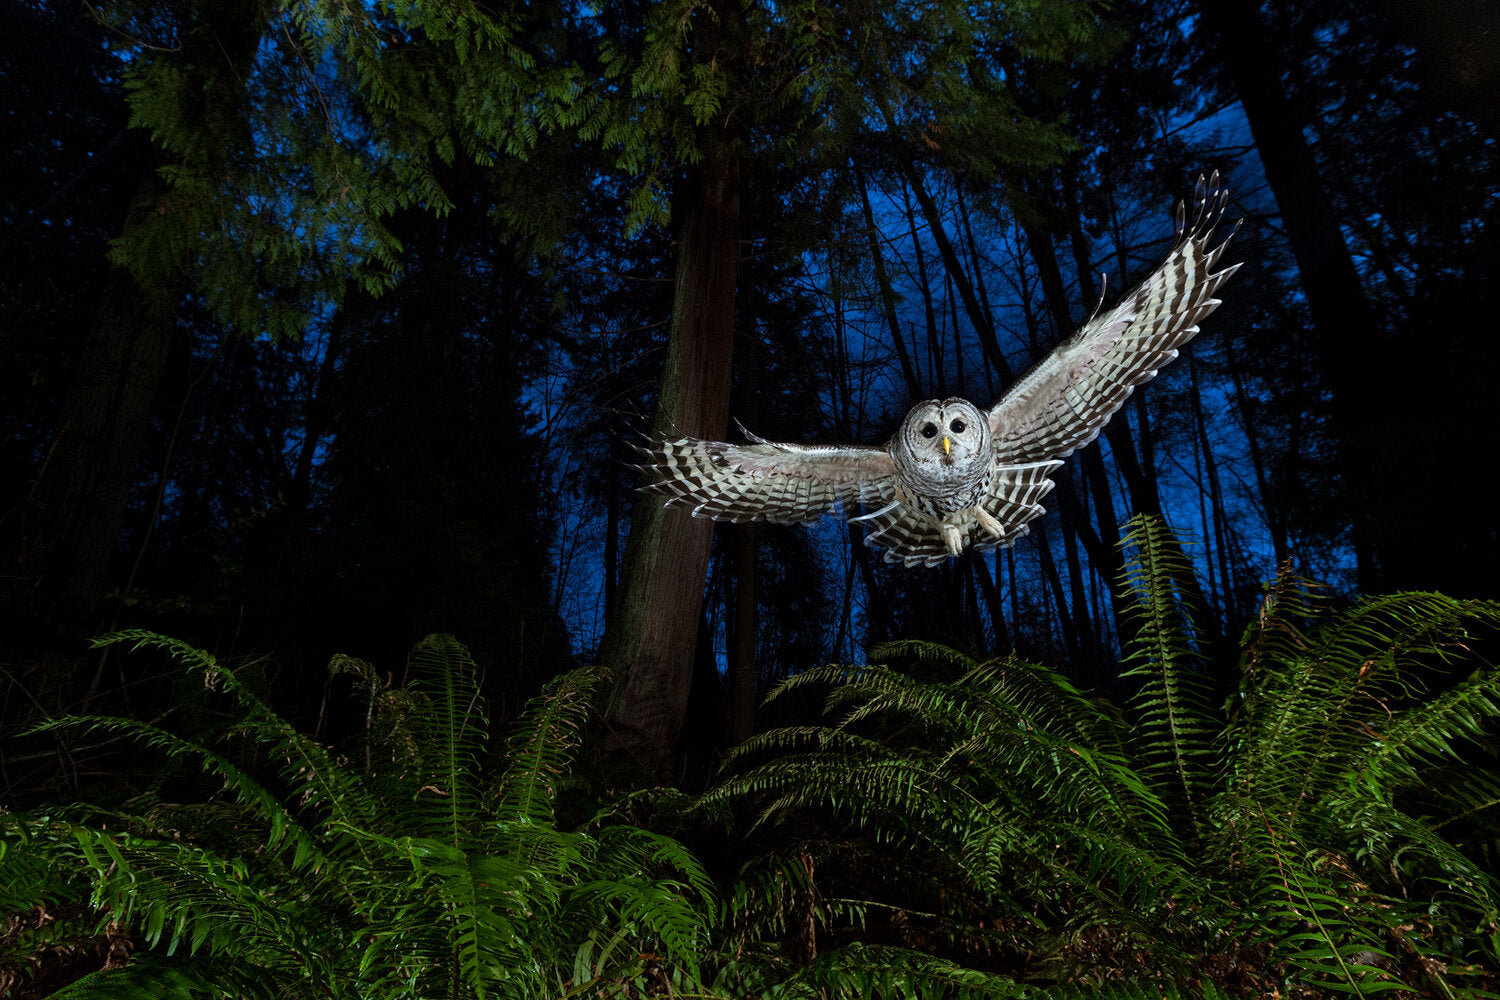 The Flight Path photo of a barred owl in flight by professional nature photographer Connor Stefanison who won the Eric Hosing Portfolio Award